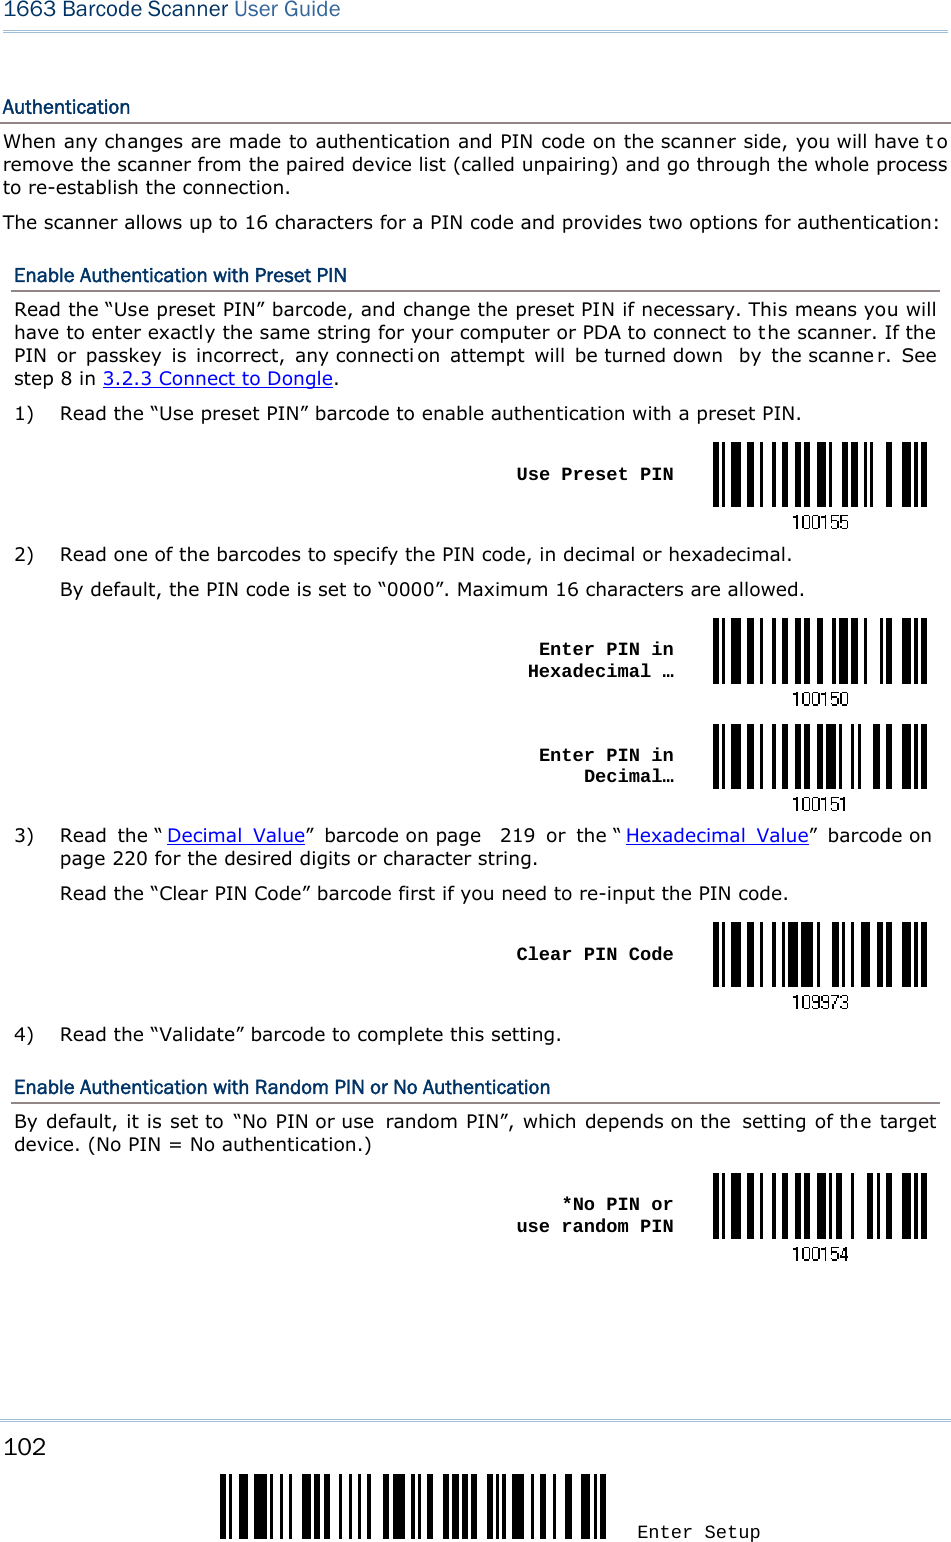 102 Enter Setup 1663 Barcode Scanner User Guide  Authentication When any changes are made to authentication and PIN code on the scanner side, you will have t o remove the scanner from the paired device list (called unpairing) and go through the whole process to re-establish the connection. The scanner allows up to 16 characters for a PIN code and provides two options for authentication: Enable Authentication with Preset PIN Read the “Use preset PIN” barcode, and change the preset PIN if necessary. This means you will have to enter exactly the same string for your computer or PDA to connect to the scanner. If the PIN or passkey is incorrect, any connecti on attempt will be turned down  by the scanne r. See step 8 in 3.2.3 Connect to Dongle. 1)  Read the “Use preset PIN” barcode to enable authentication with a preset PIN.  Use Preset PIN2)  Read one of the barcodes to specify the PIN code, in decimal or hexadecimal. By default, the PIN code is set to “0000”. Maximum 16 characters are allowed.  Enter PIN in Hexadecimal … Enter PIN in Decimal…3)  Read the “ Decimal Value” barcode on page  219 or the “ Hexadecimal Value” barcode on  page 220 for the desired digits or character string. Read the “Clear PIN Code” barcode first if you need to re-input the PIN code.  Clear PIN Code4)  Read the “Validate” barcode to complete this setting. Enable Authentication with Random PIN or No Authentication By default, it is set to “No PIN or use  random PIN”, which depends on the  setting of the target device. (No PIN = No authentication.)  *No PIN or  use random PIN     